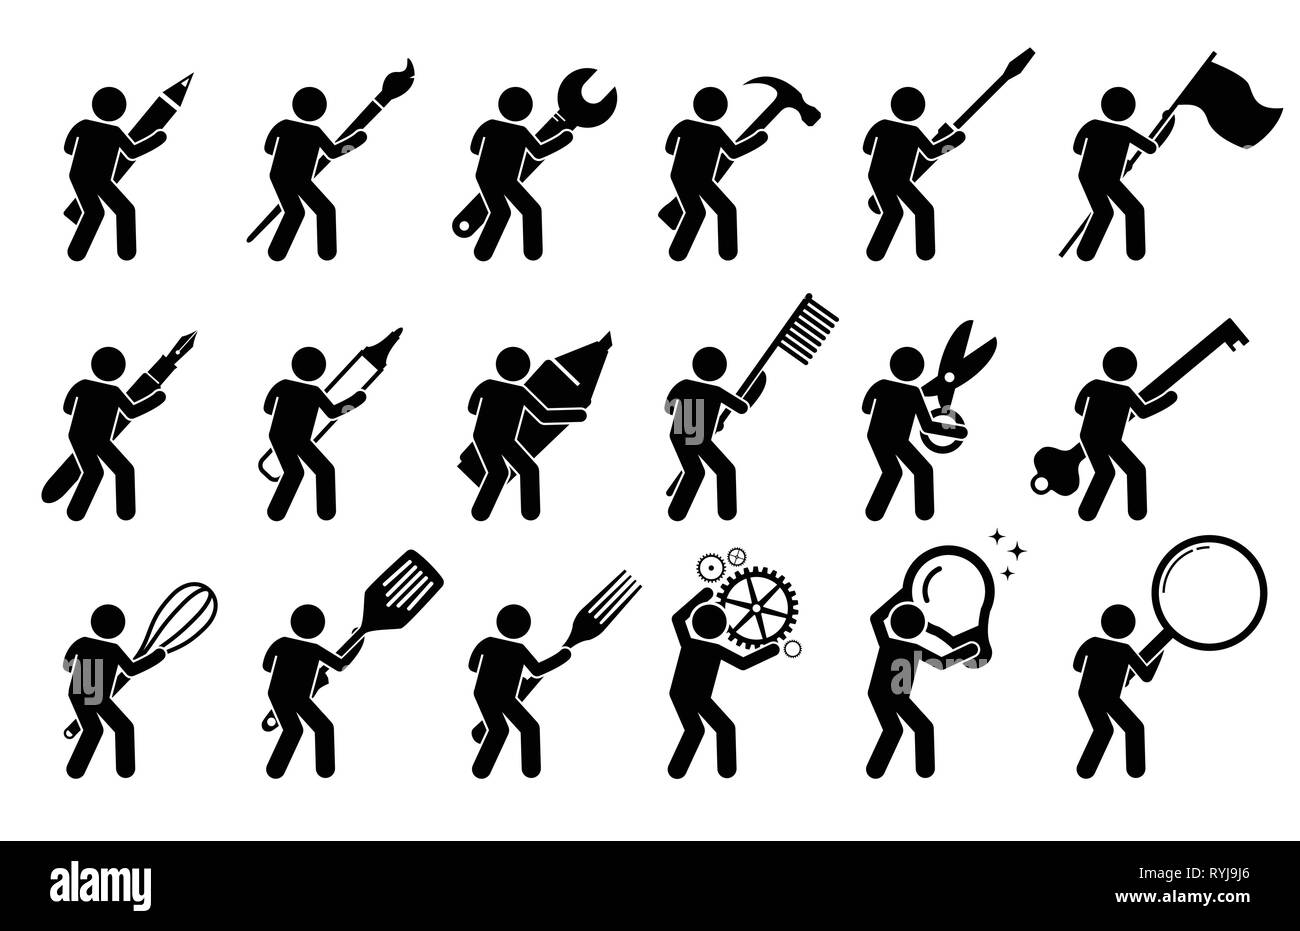 Stick figure stick man using various tools, and equipments. It includes writing and drawing instruments, mechanic tools, cooking utensils, and other o Stock Vector